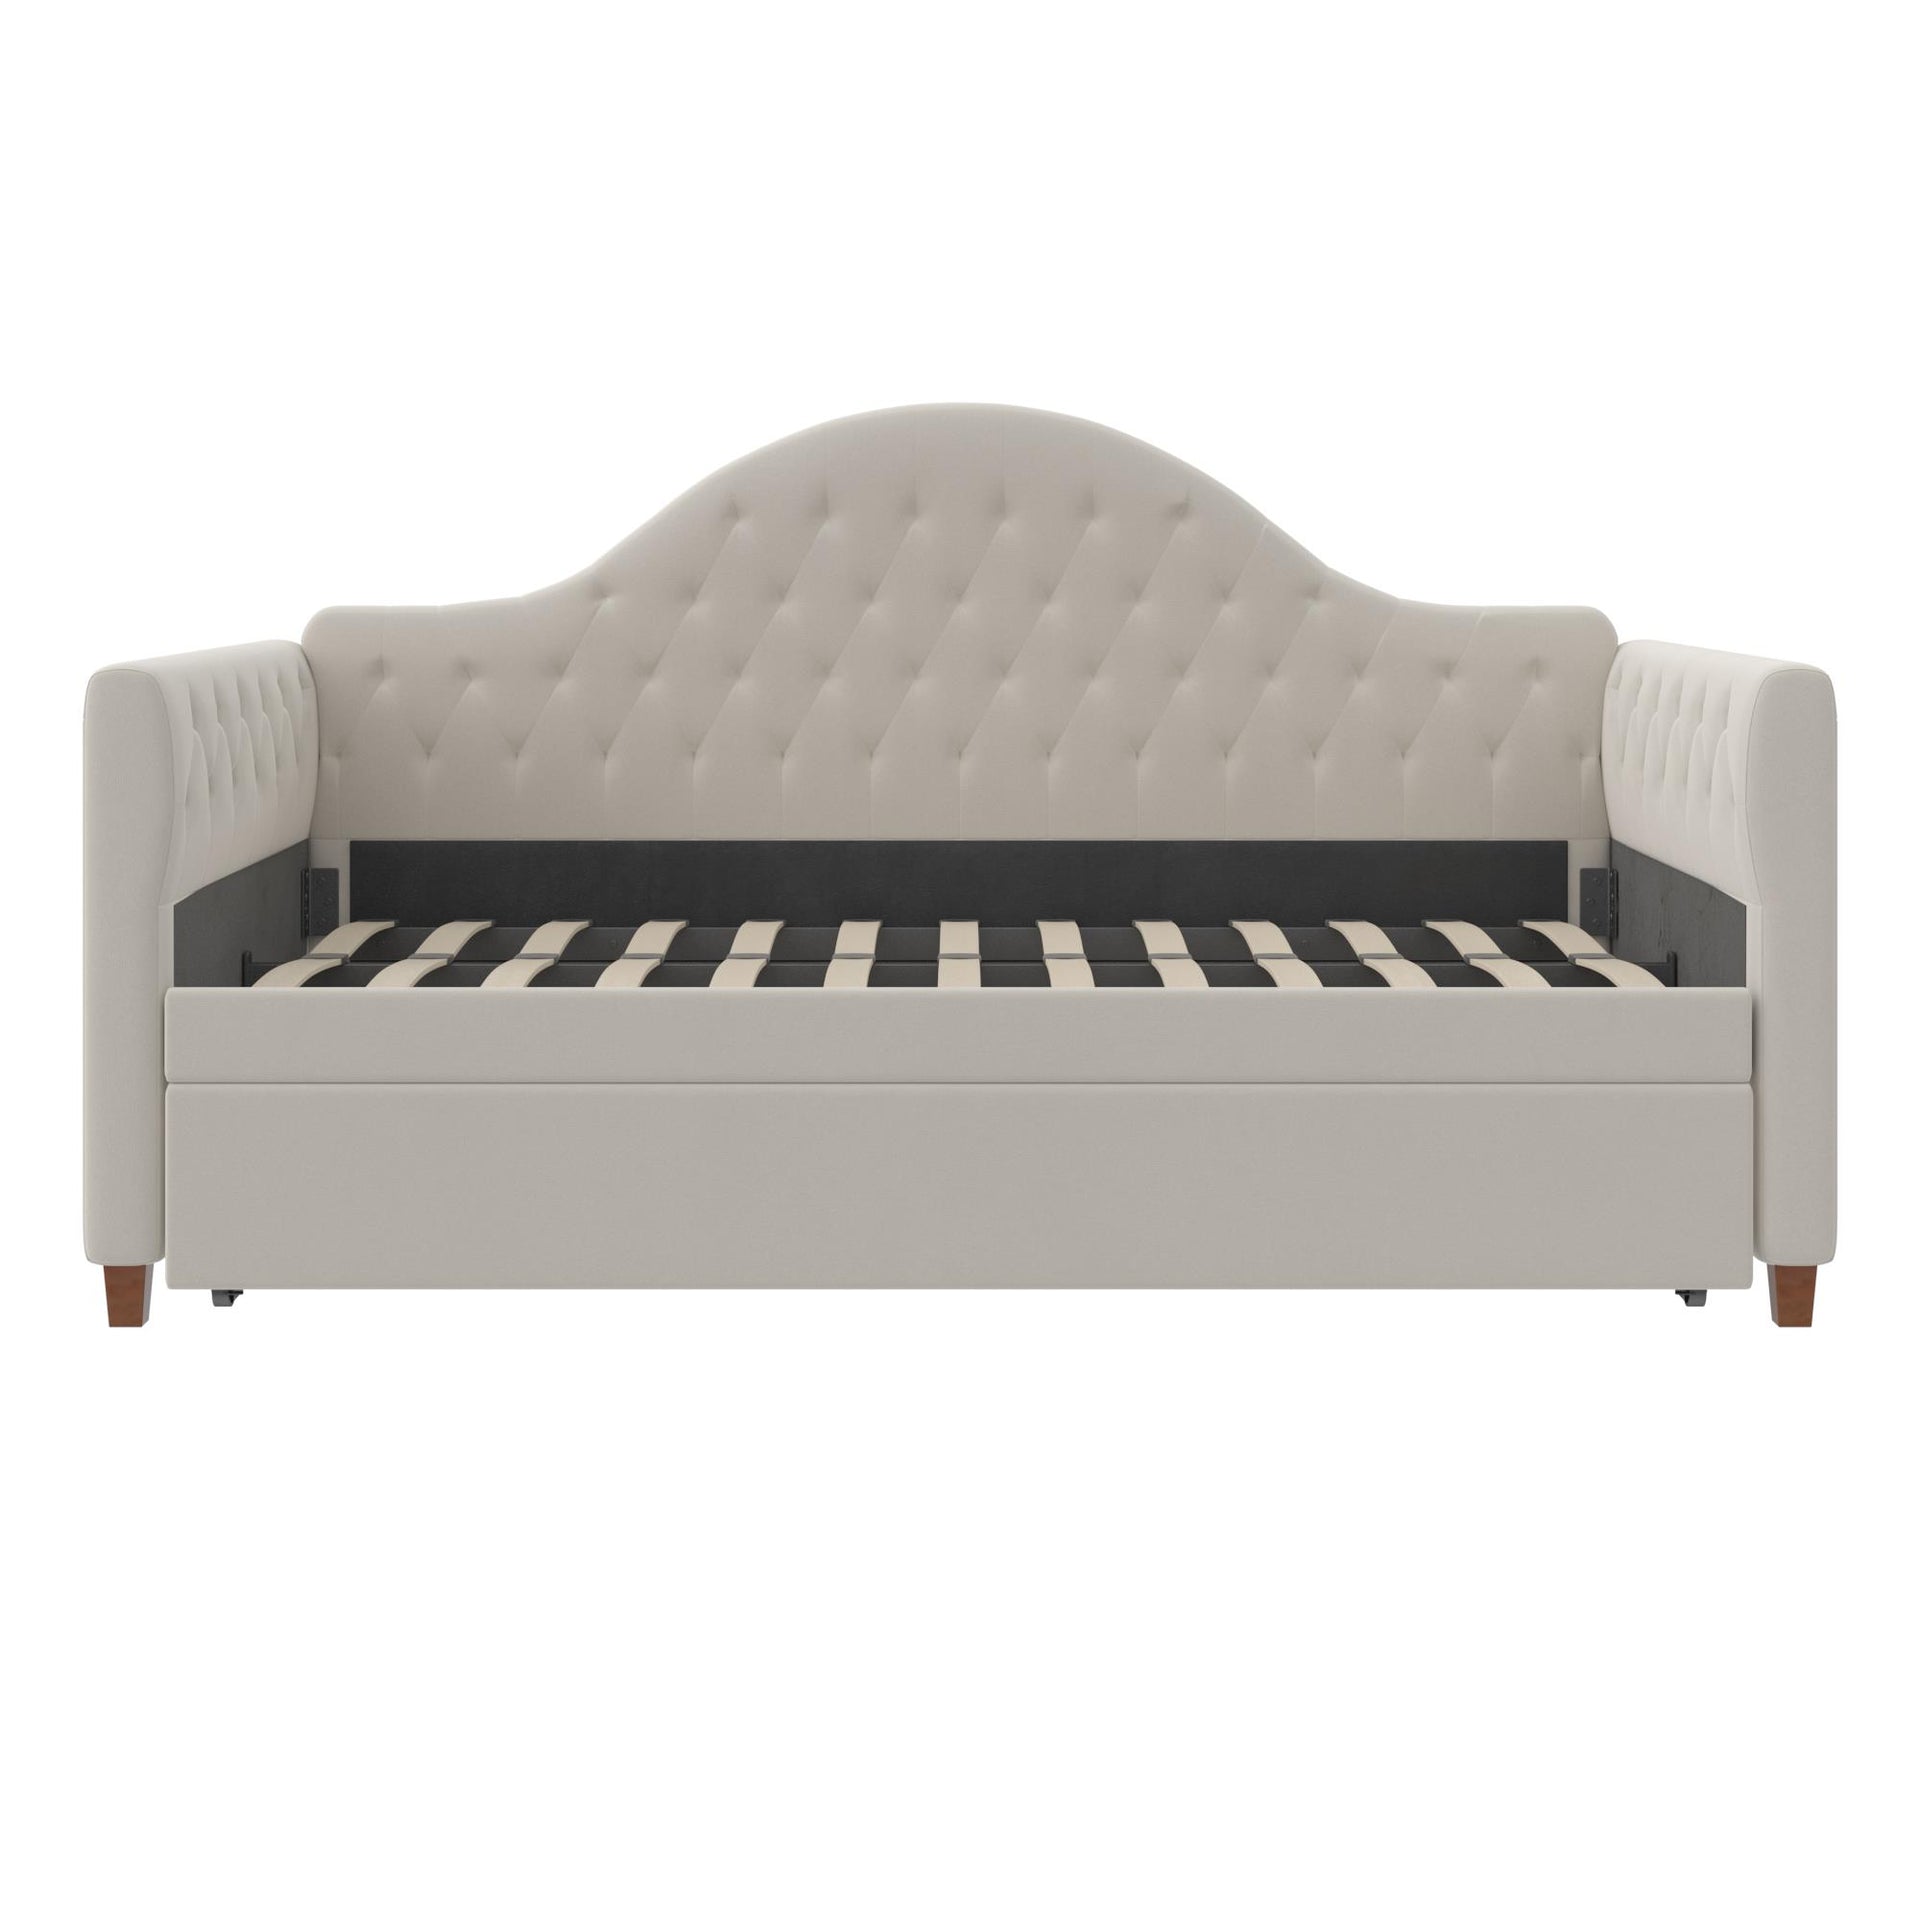 Little Seeds Rowan Valley Arden Daybed with Trundle - Dove Gray